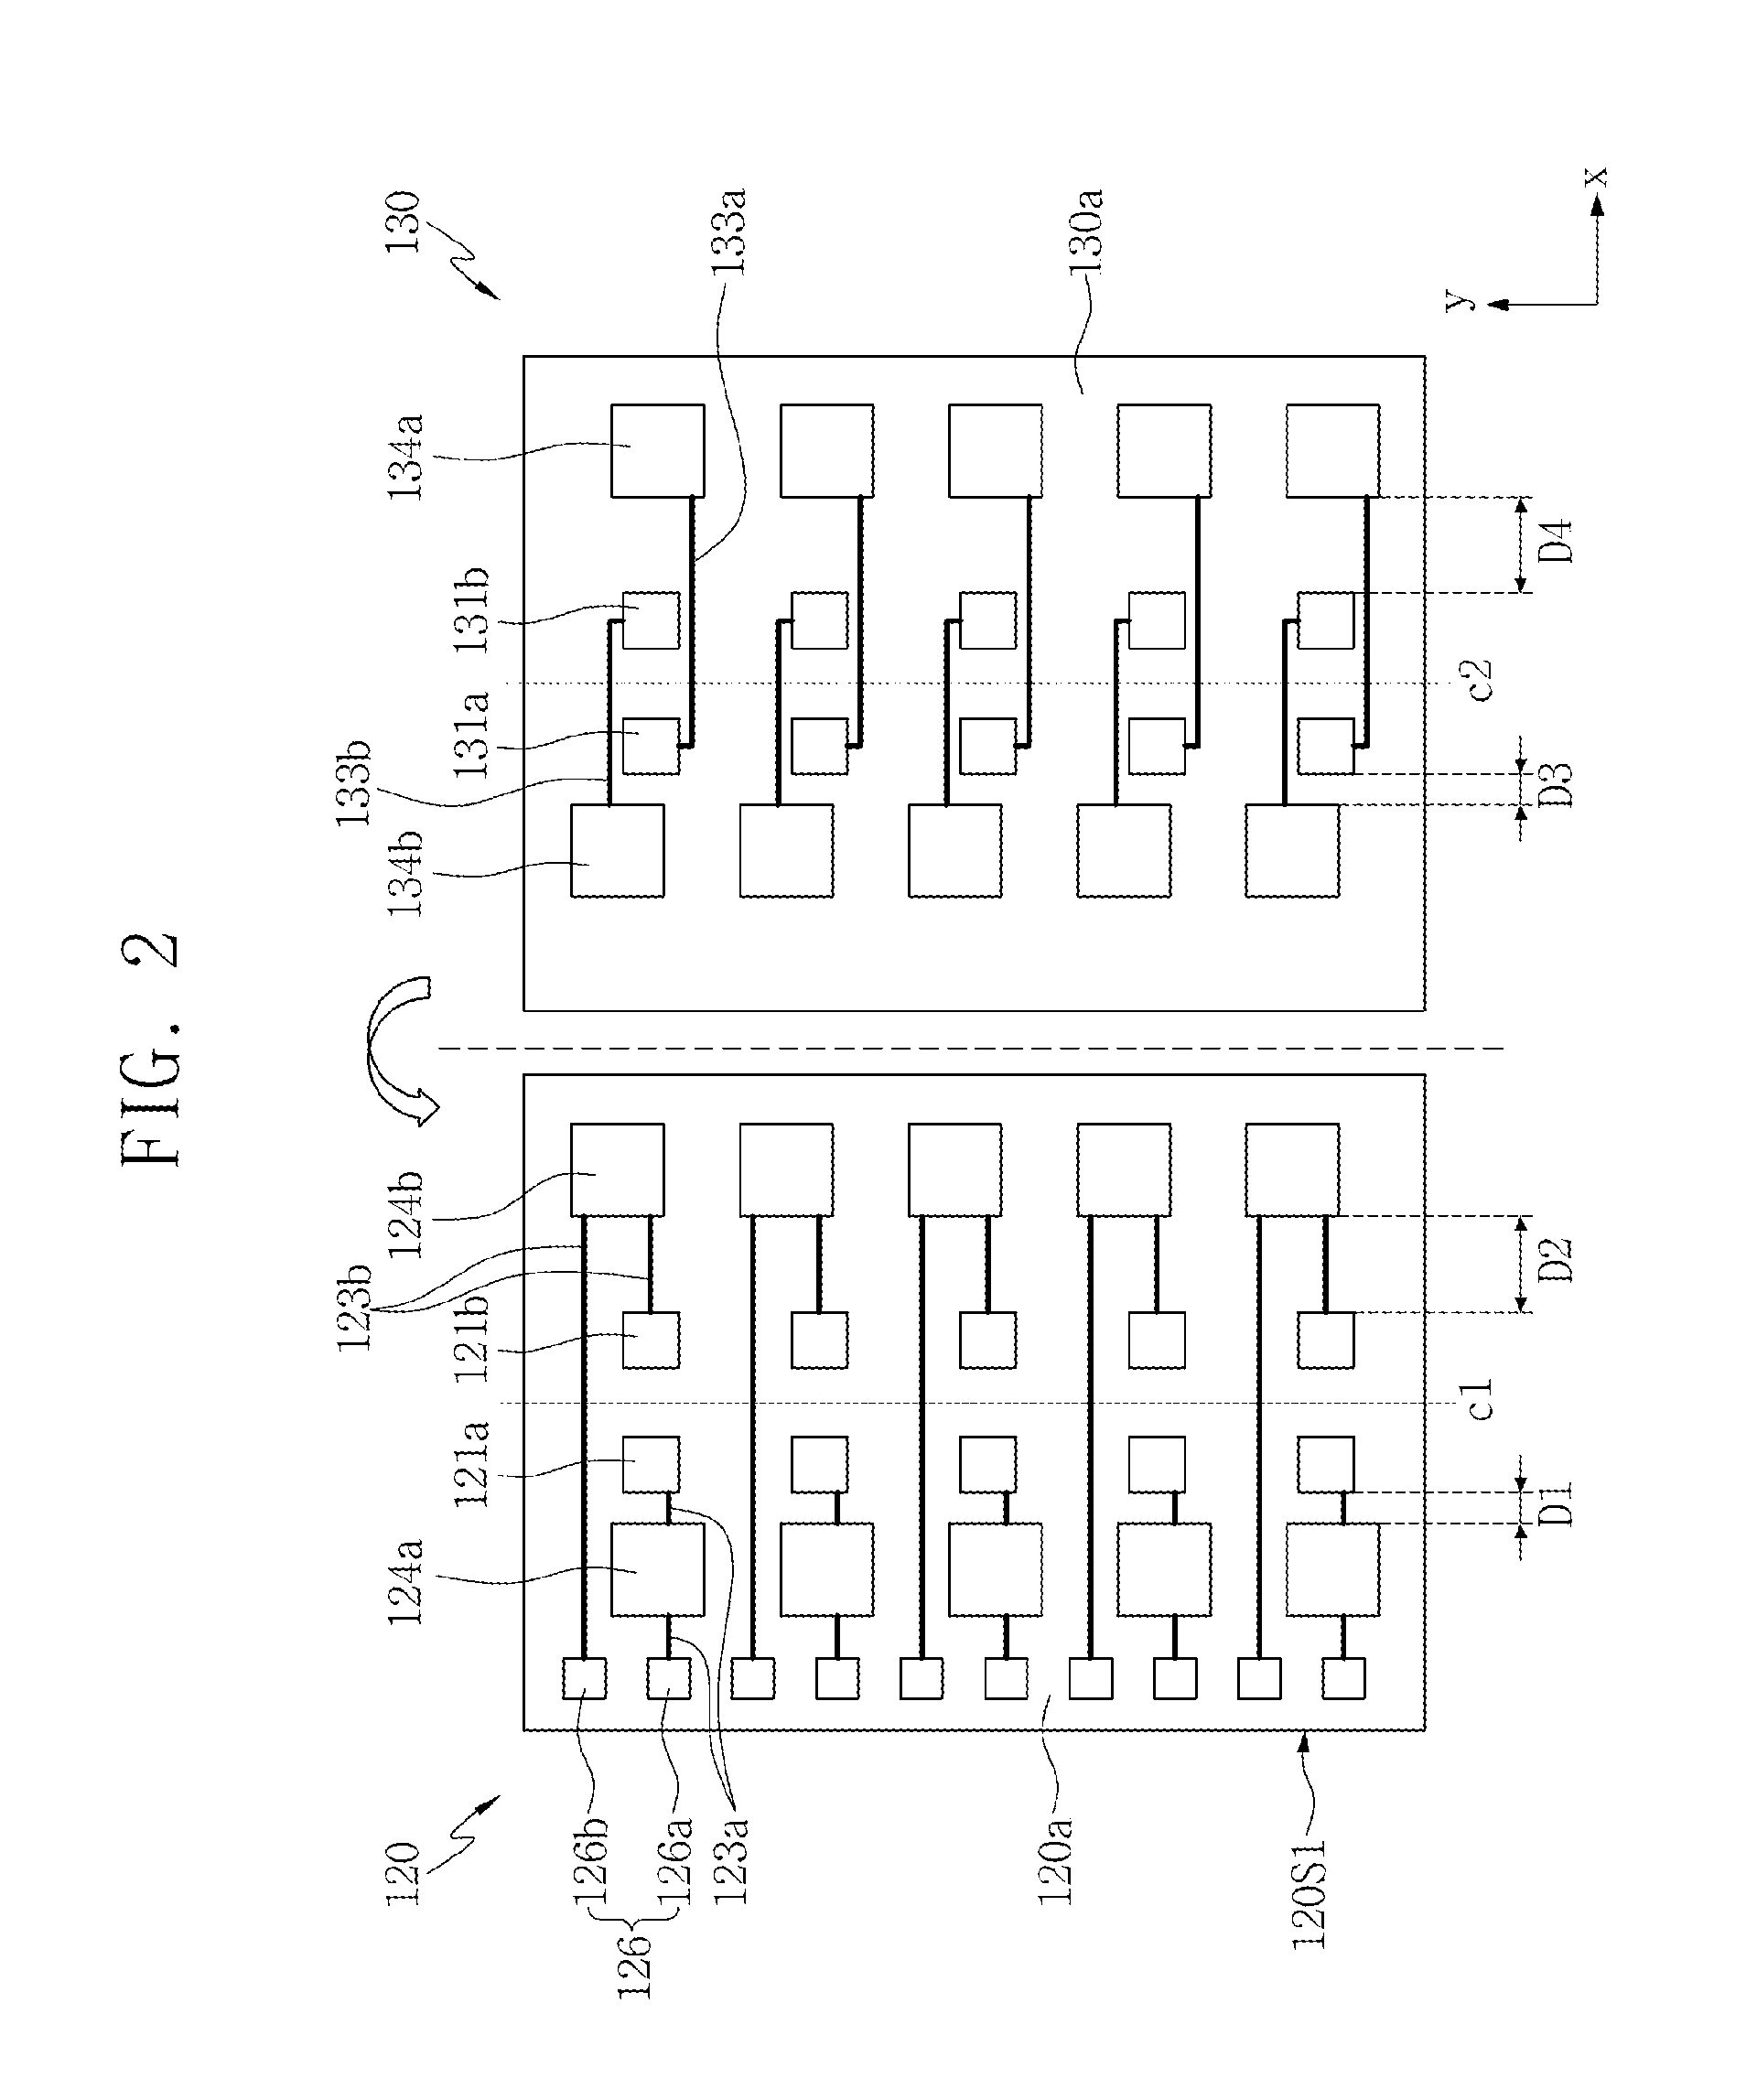 Semiconductor package having cascaded chip stack